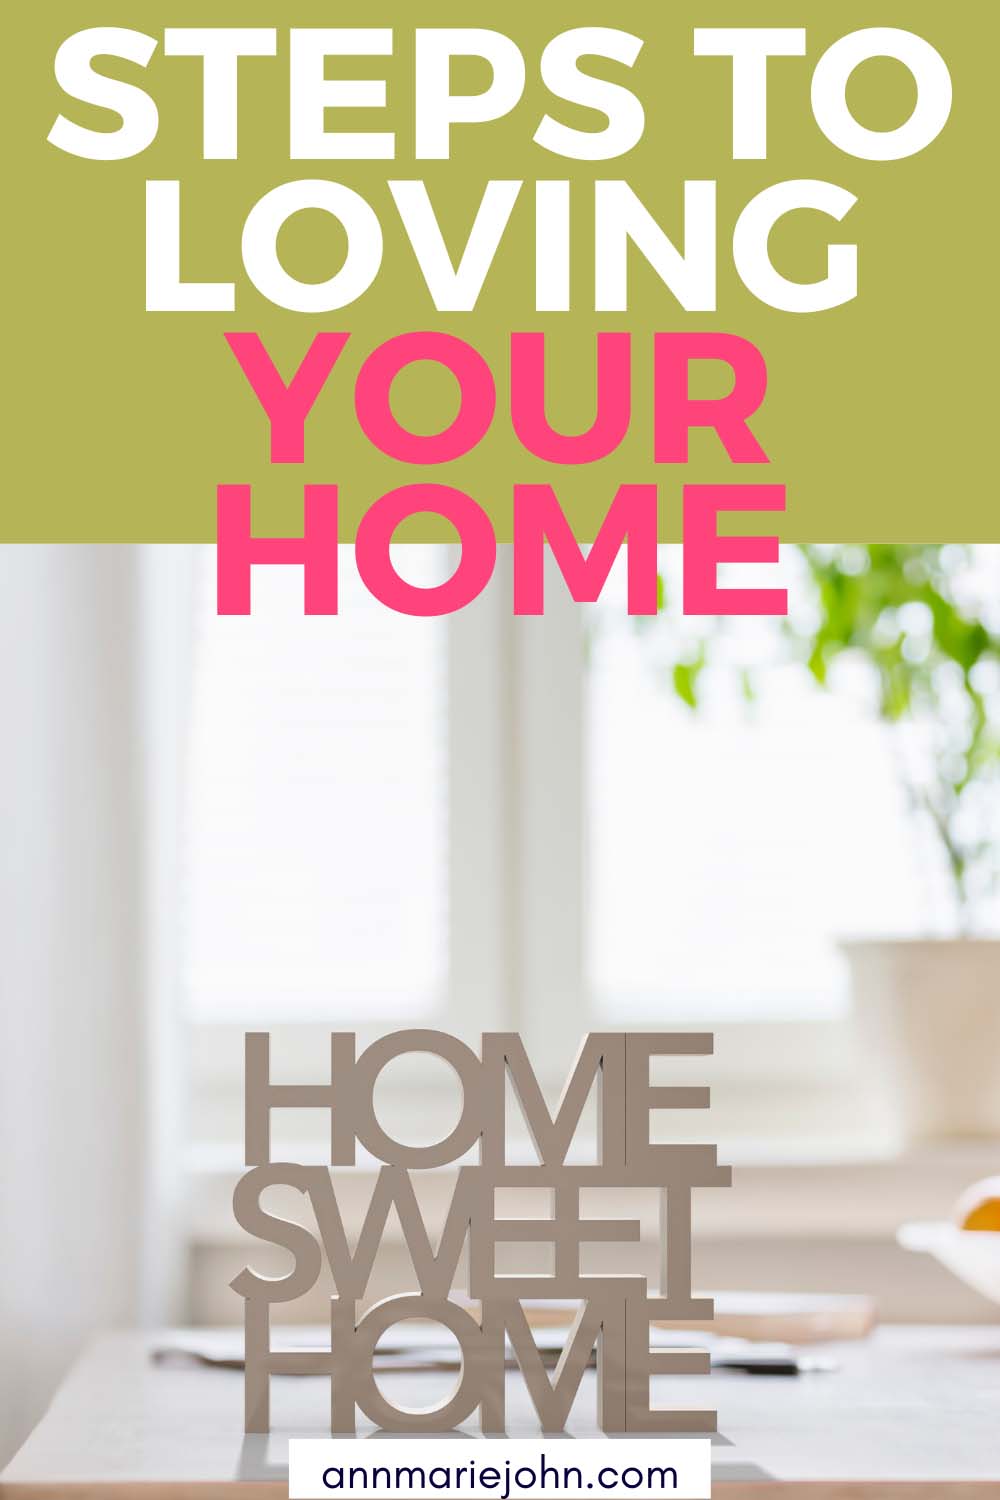 Steps to Loving Your Home